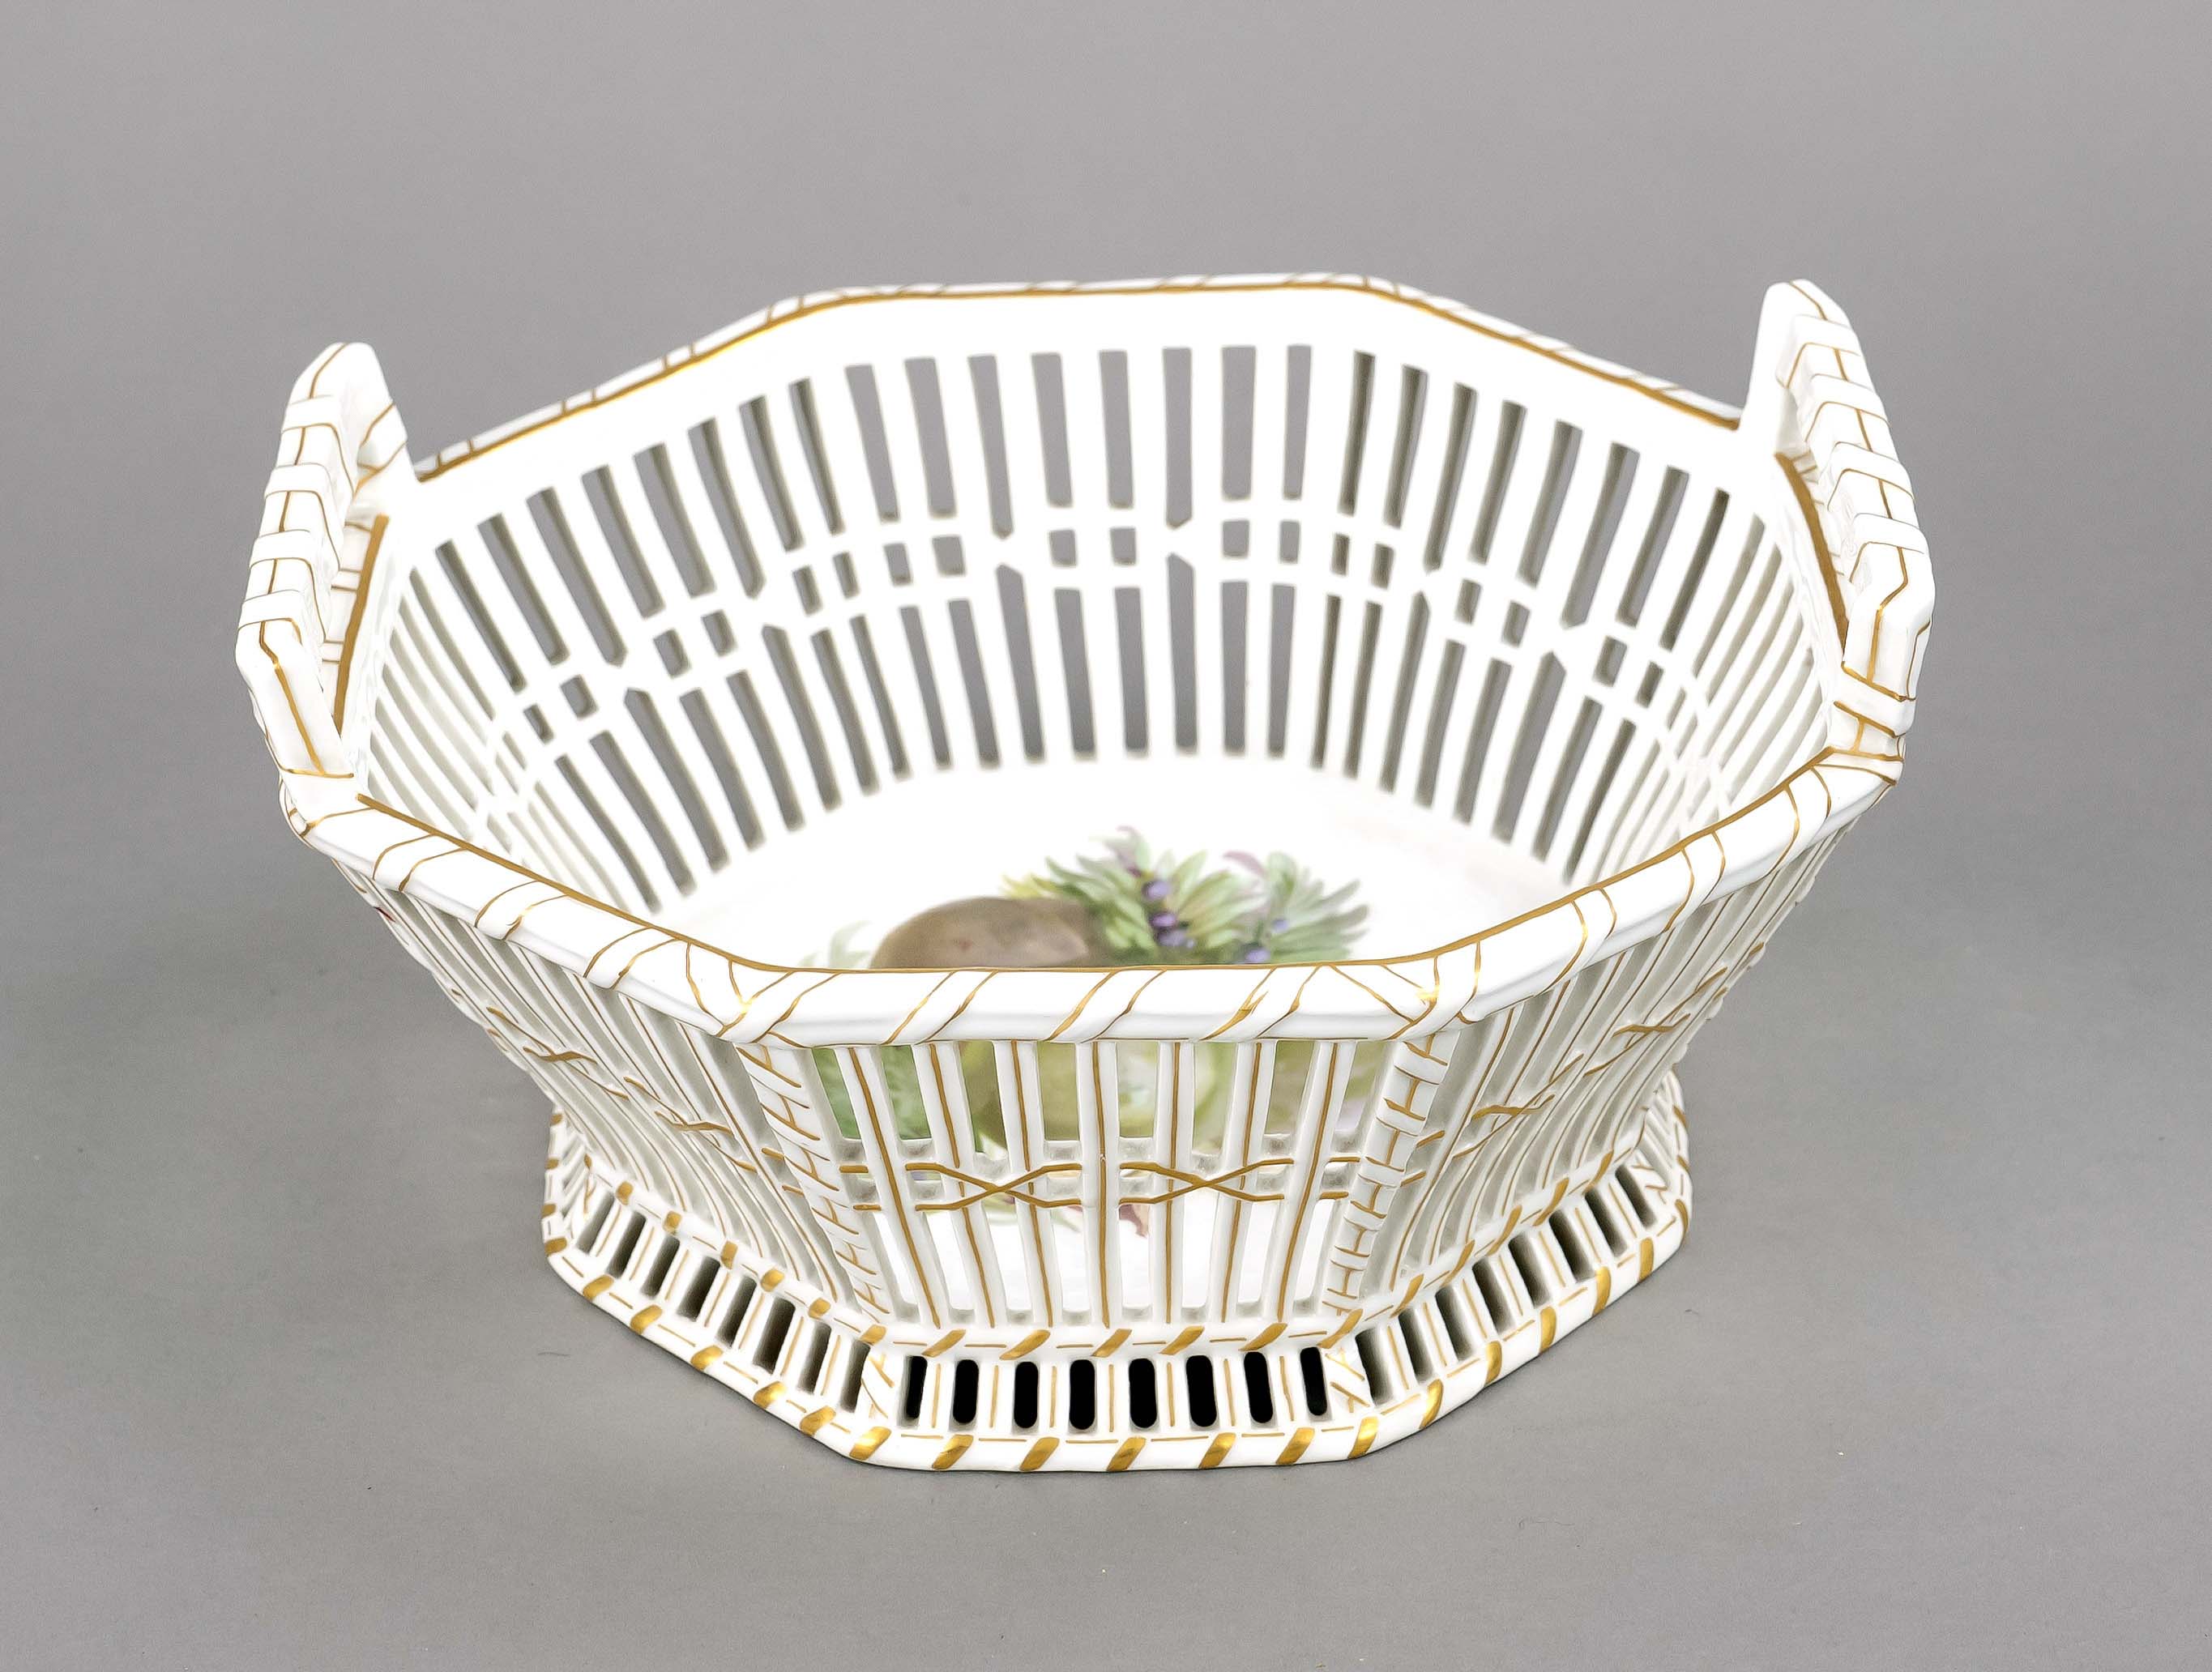 Basket, KPM Berlin, mark 1870-1945, 1st choice, red imperial orb mark, octagonal form with side